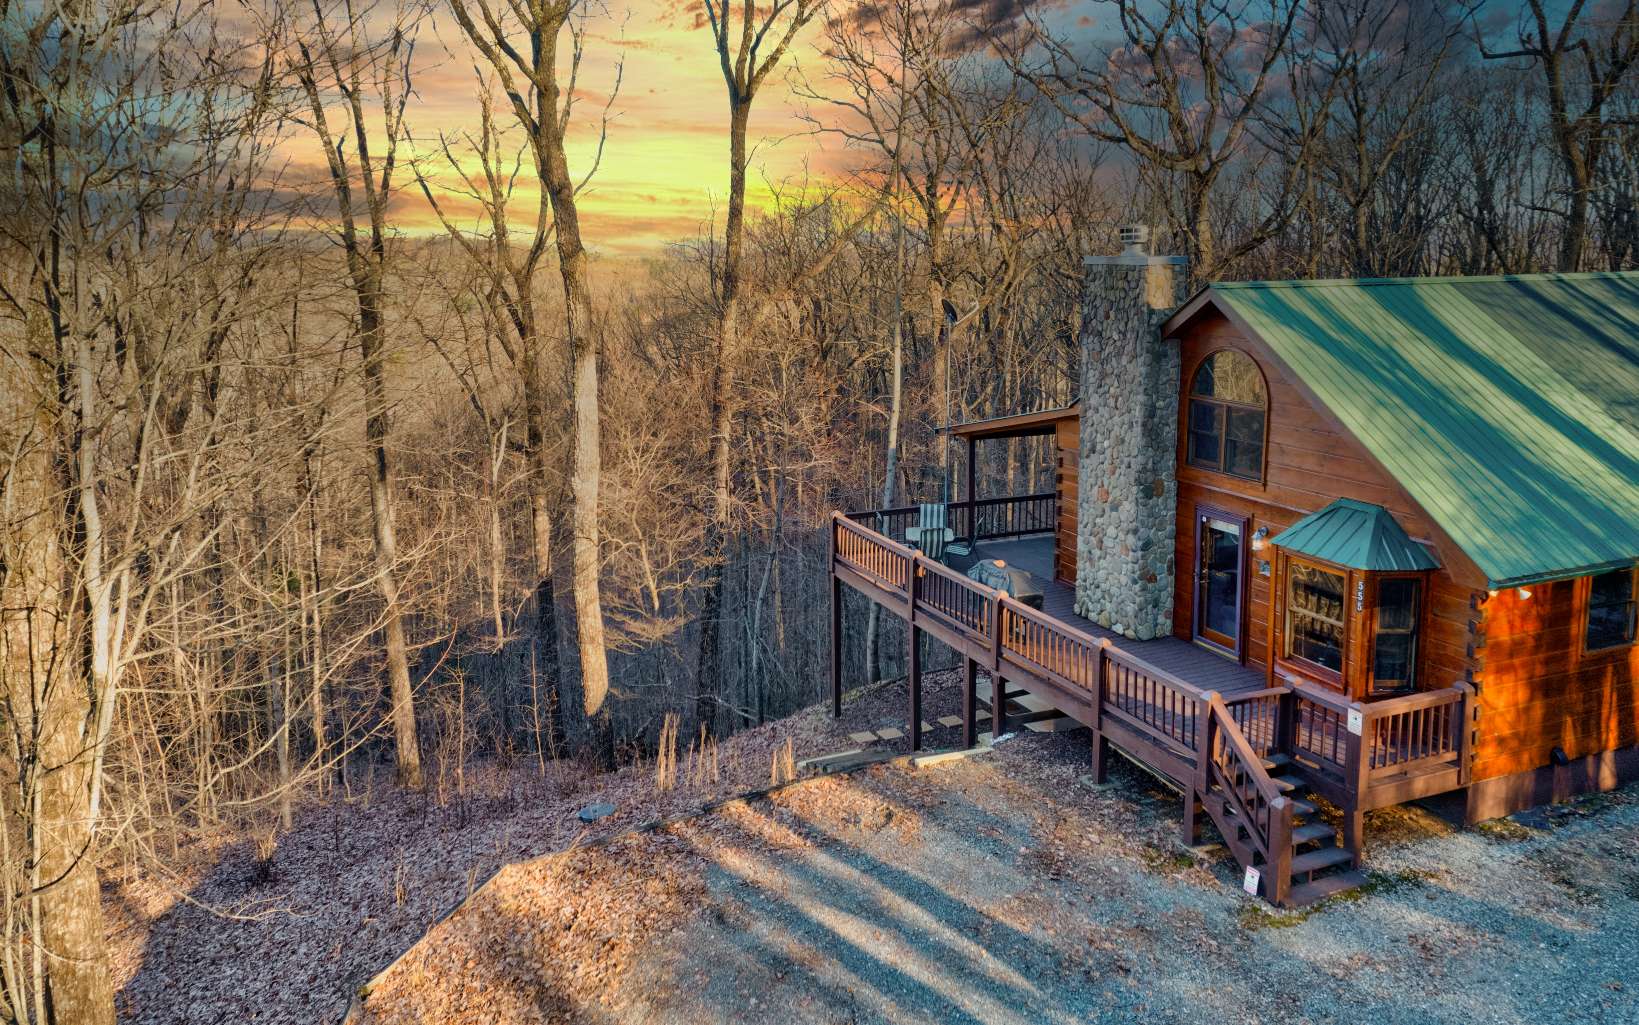 Beauty, Peace, Privacy-Borders Fightingtown Creek Nature Park. Long Range Mountain Views, Year Round! This Cabin is down a beautiful mountain road. It has a beautiful Rock Fireplace, a game room downstairs, and a Hot Tub! Nice big covered Porch to enjoy the Amazingly BIG VIEW! Two Bedrooms and Two bathrooms on the main level. Full bath downstairs. Heating and air are run to the attic for future kids sleeping loft. Great buy in the Mountains, waiting for your finishing touches!